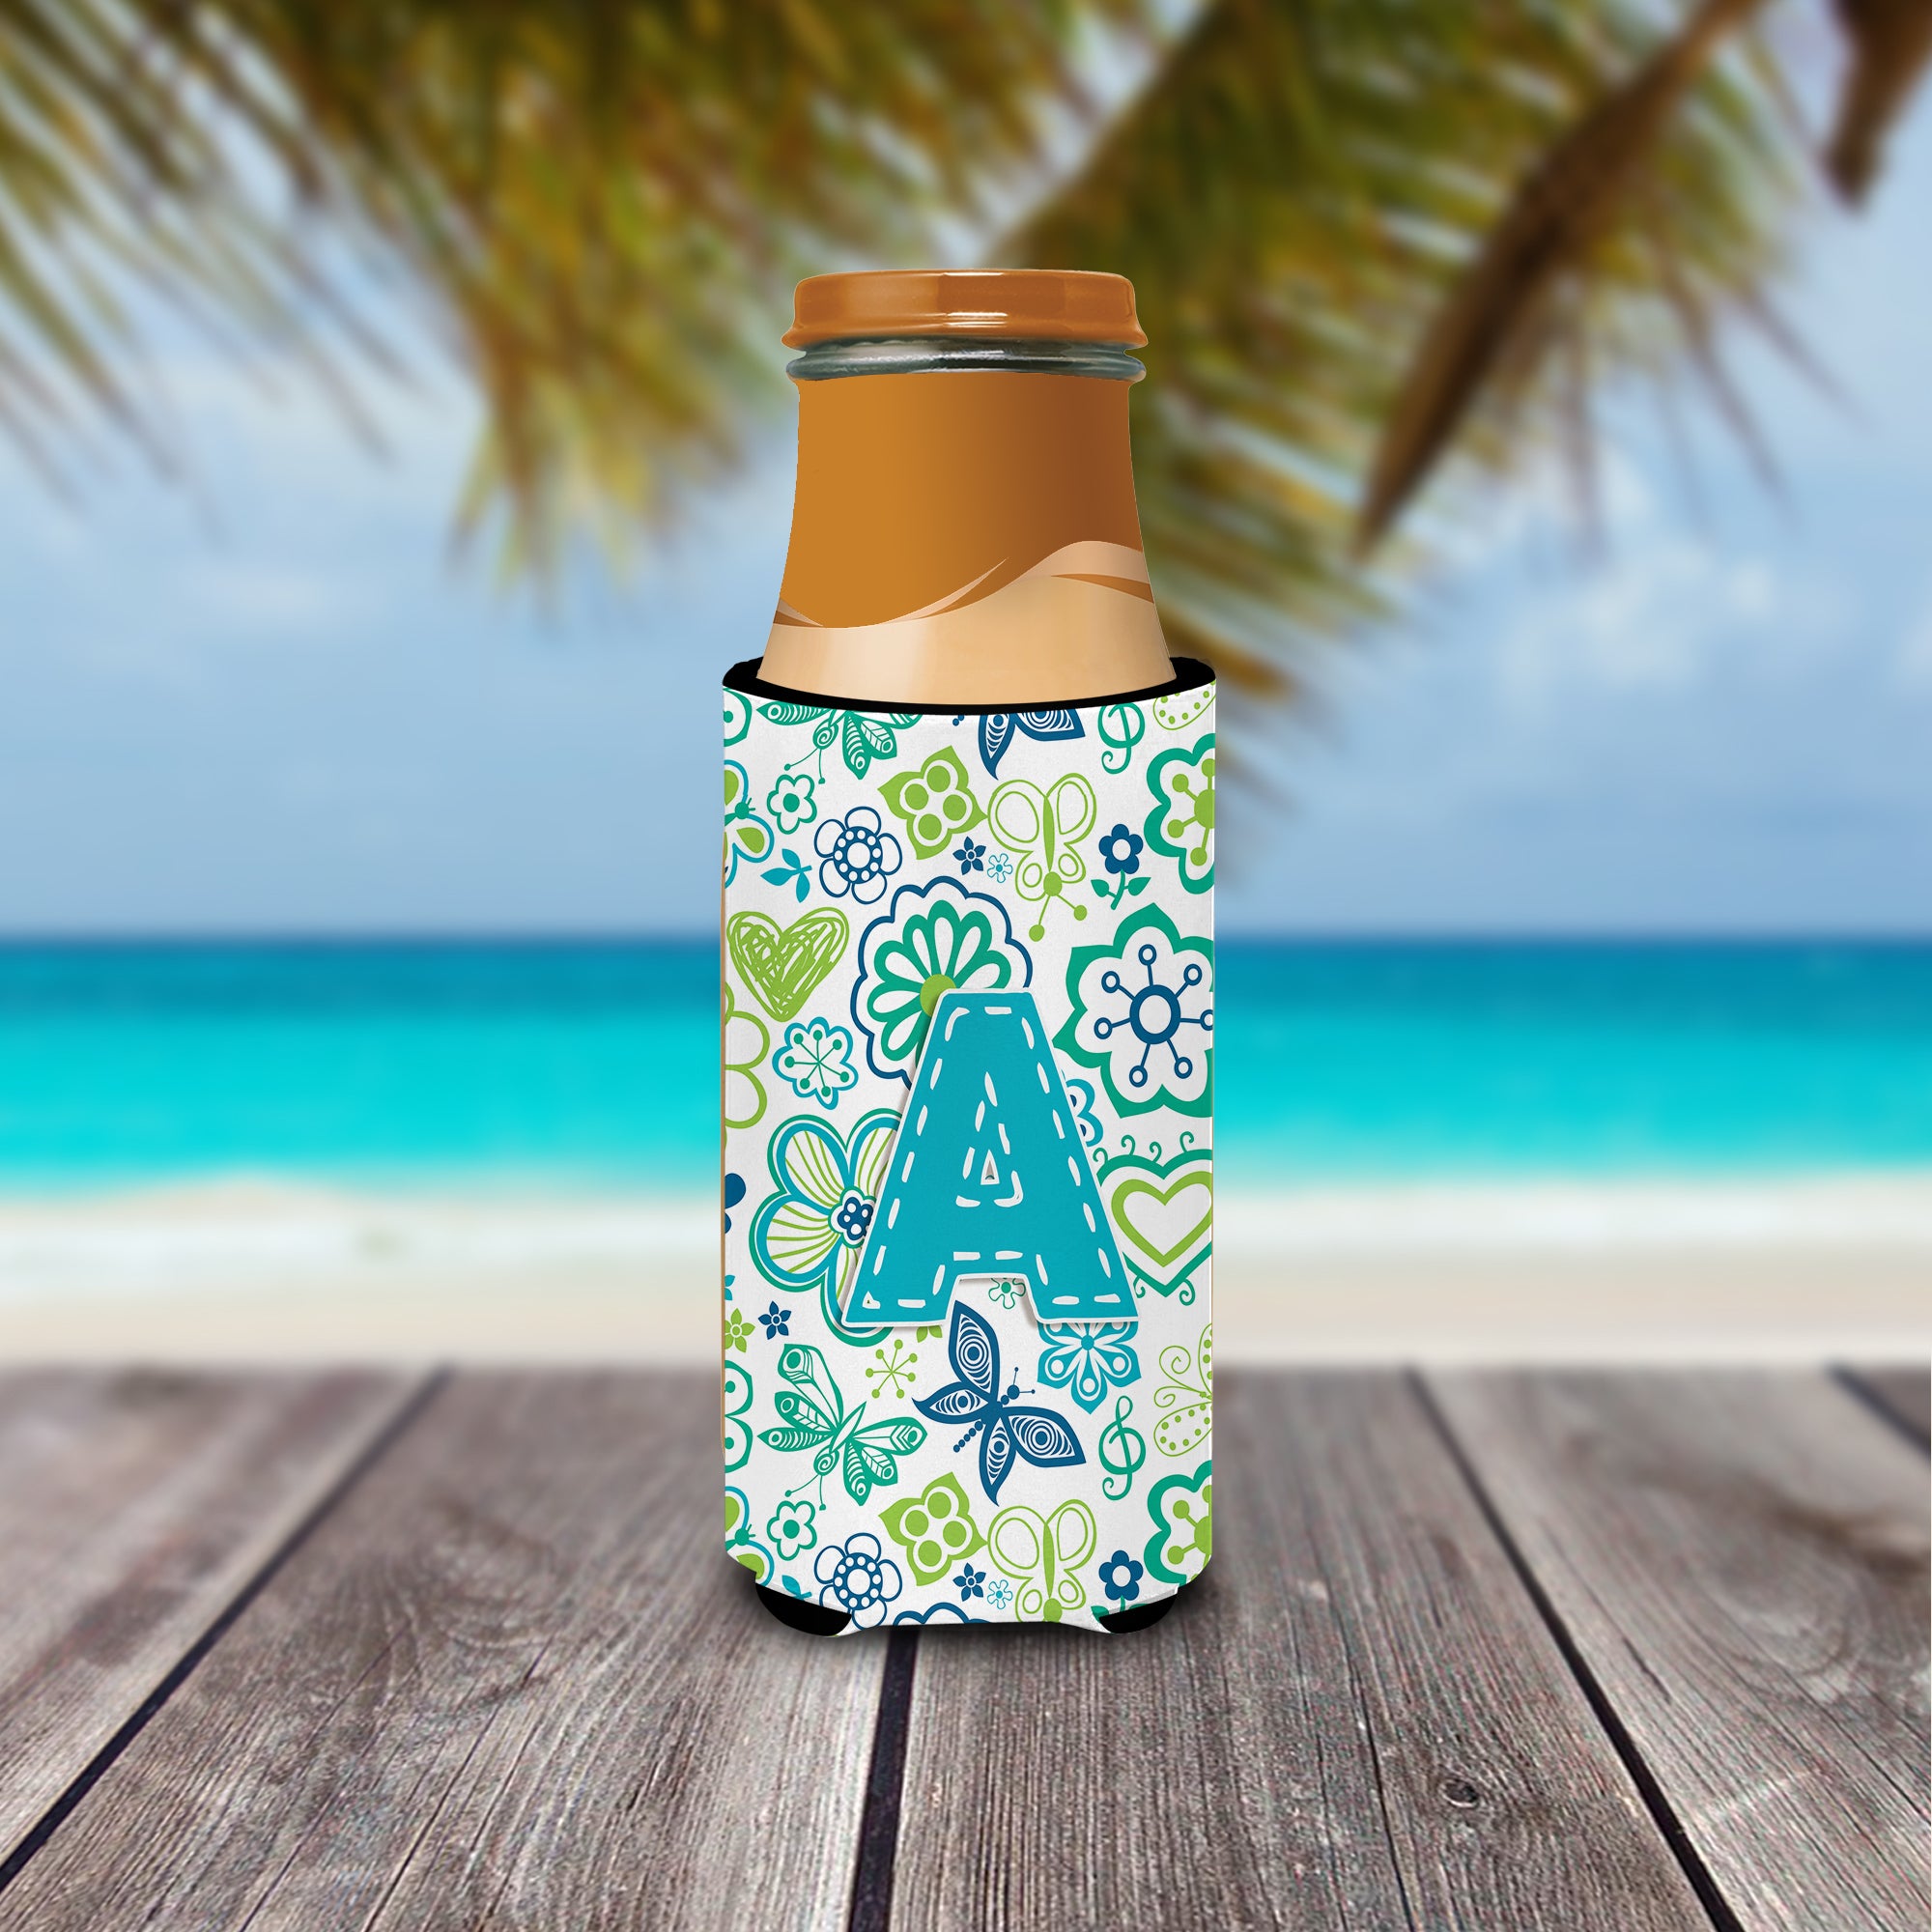 Letter A Flowers and Butterflies Teal Blue Ultra Beverage Insulators for slim cans CJ2006-AMUK